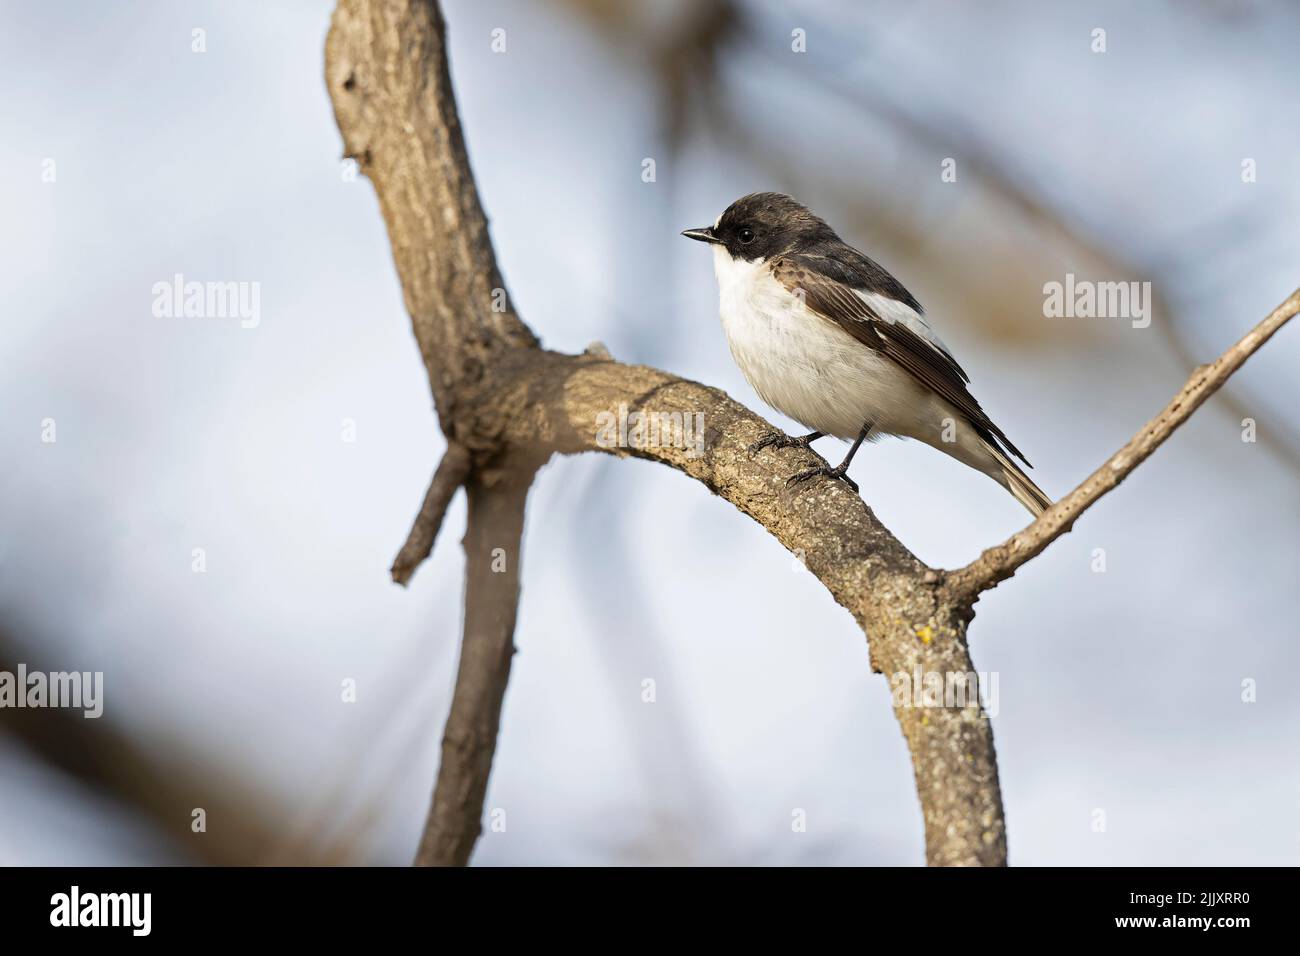 A male European pied flycatcher (Ficedula hypoleuca) perched on a branch. Stock Photo